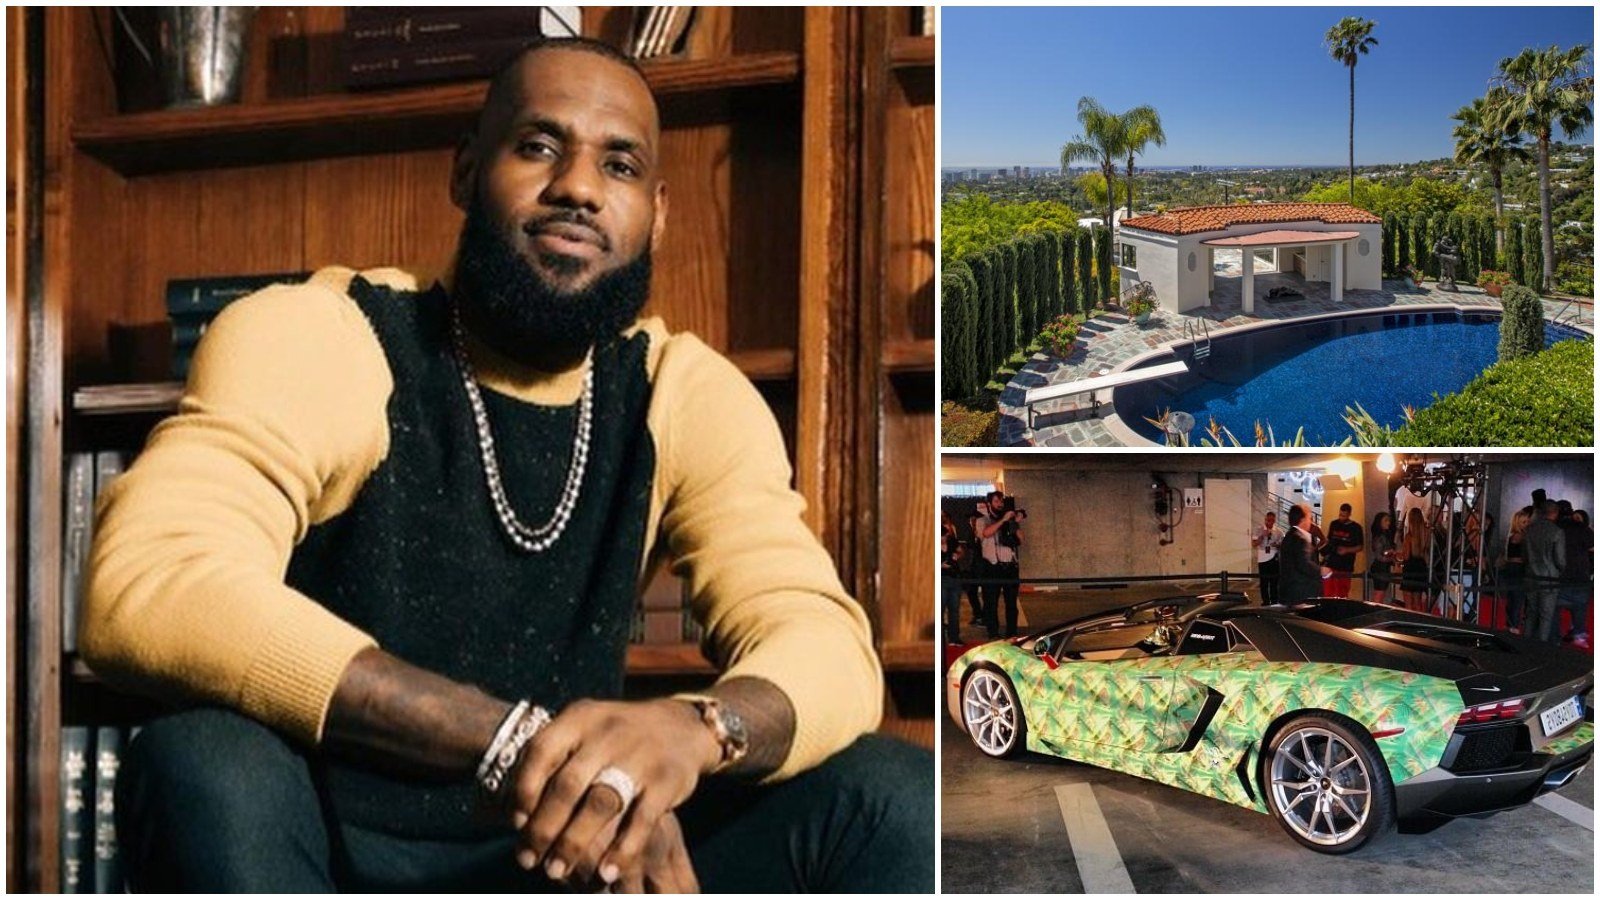 LeBron James, king of the NBA, has raked in millions and spends it on luxury mansions, cars and much more ... Photos: @kicksonfire, @erealty/Twitter; @kingjames/Instagram